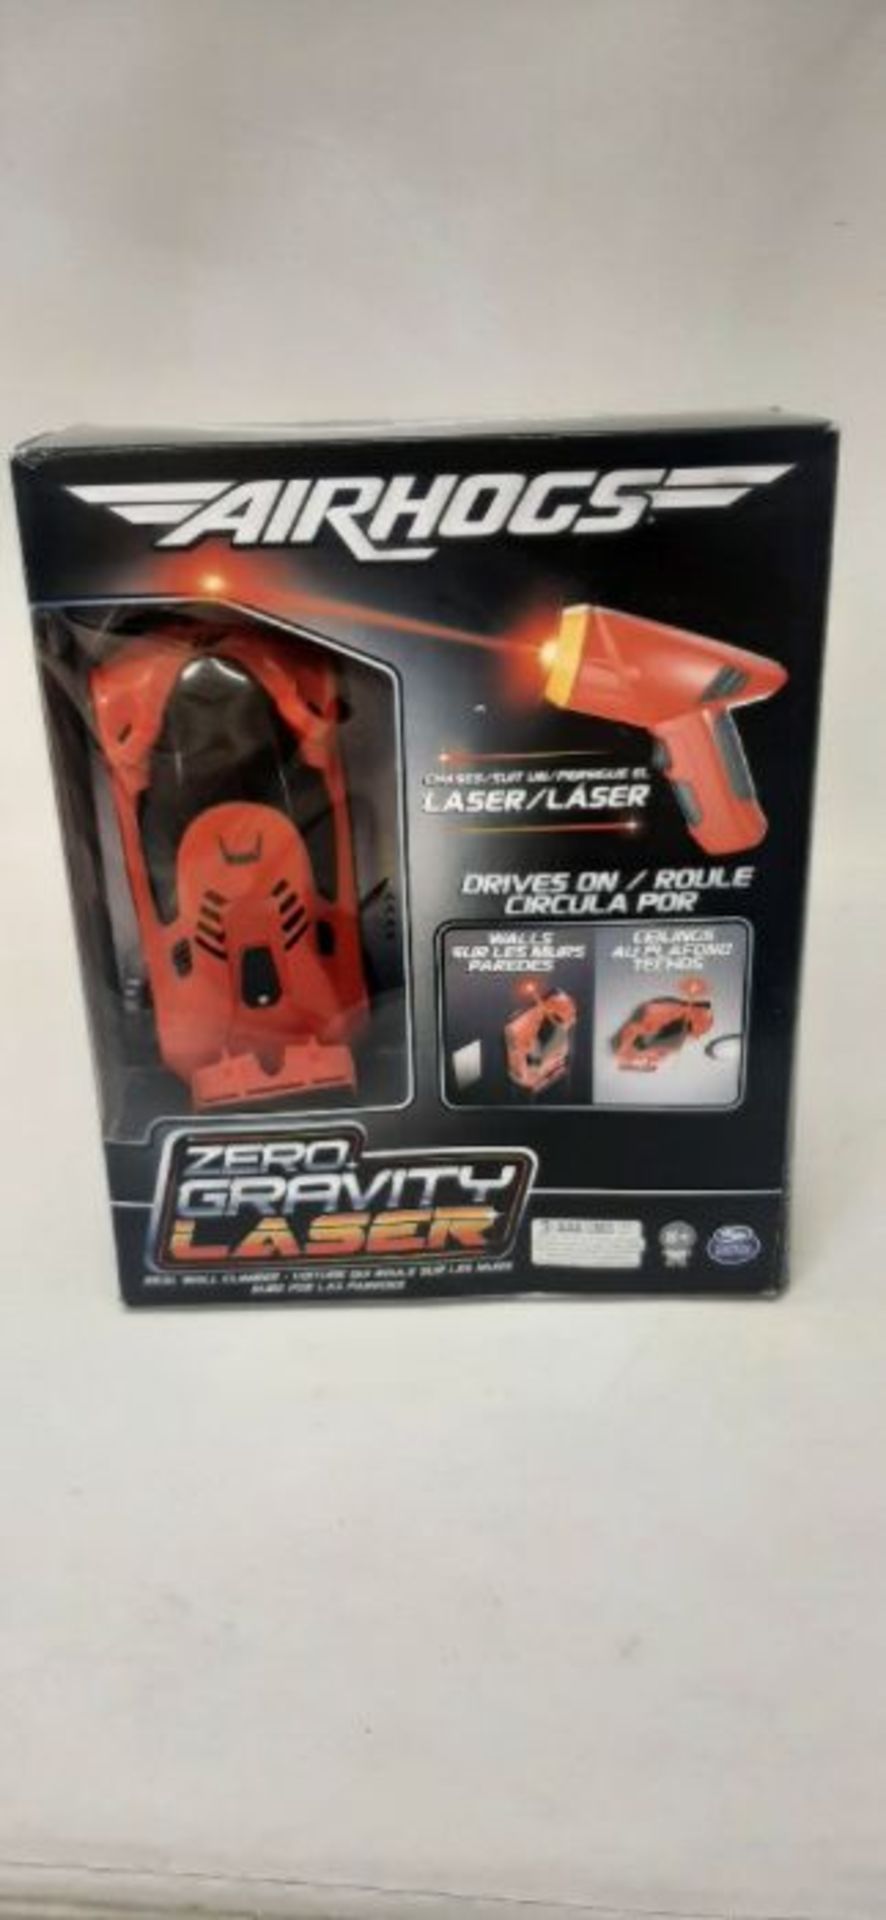 Air Hogs Zero Gravity Laser, Laser-Guided Real Wall-Climbing Race Car, Red - Image 2 of 2